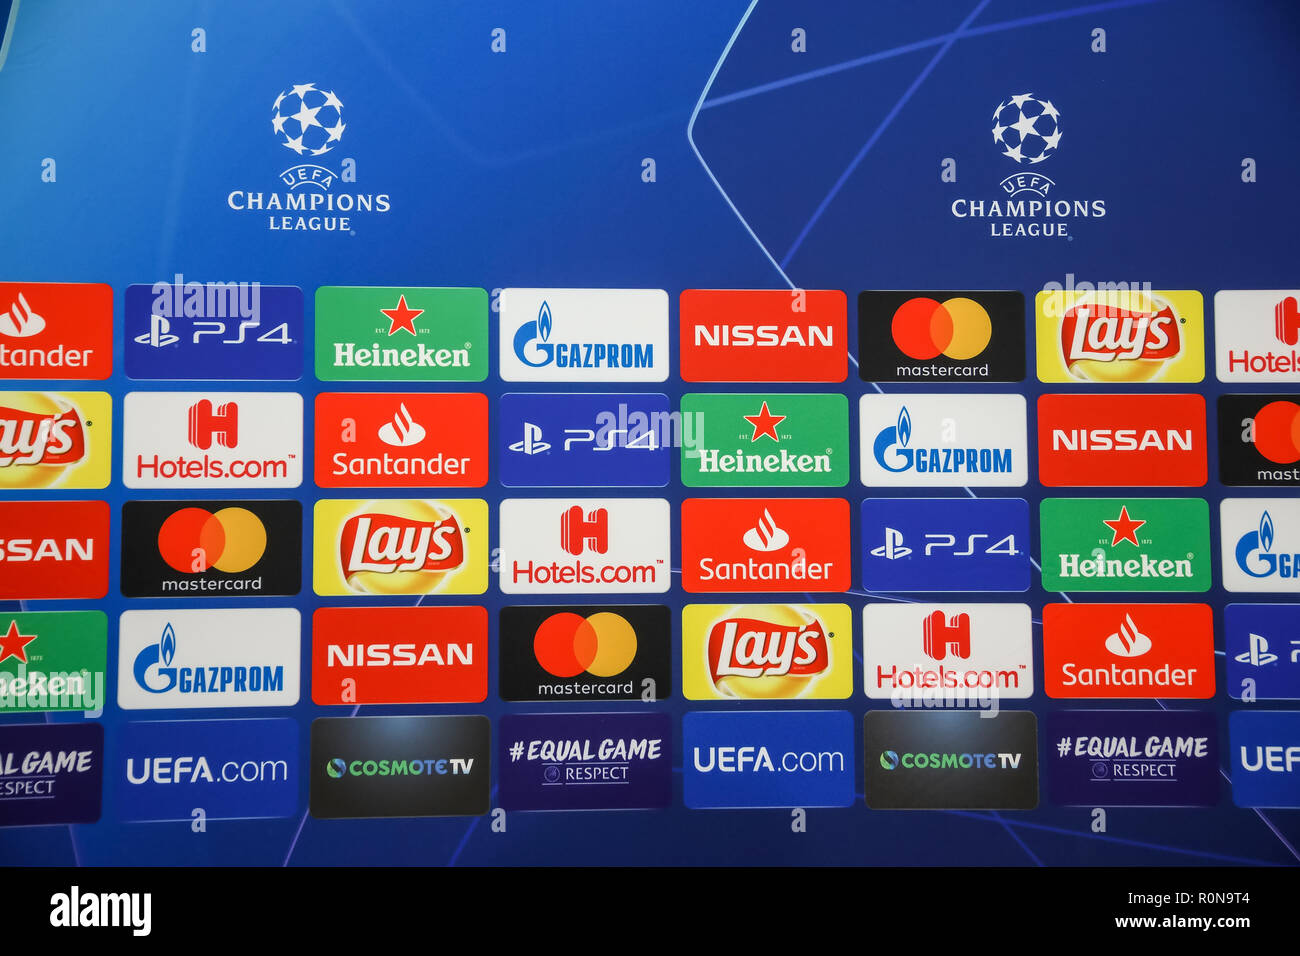 Overview Of The 2019 20 Champions League Sponsors